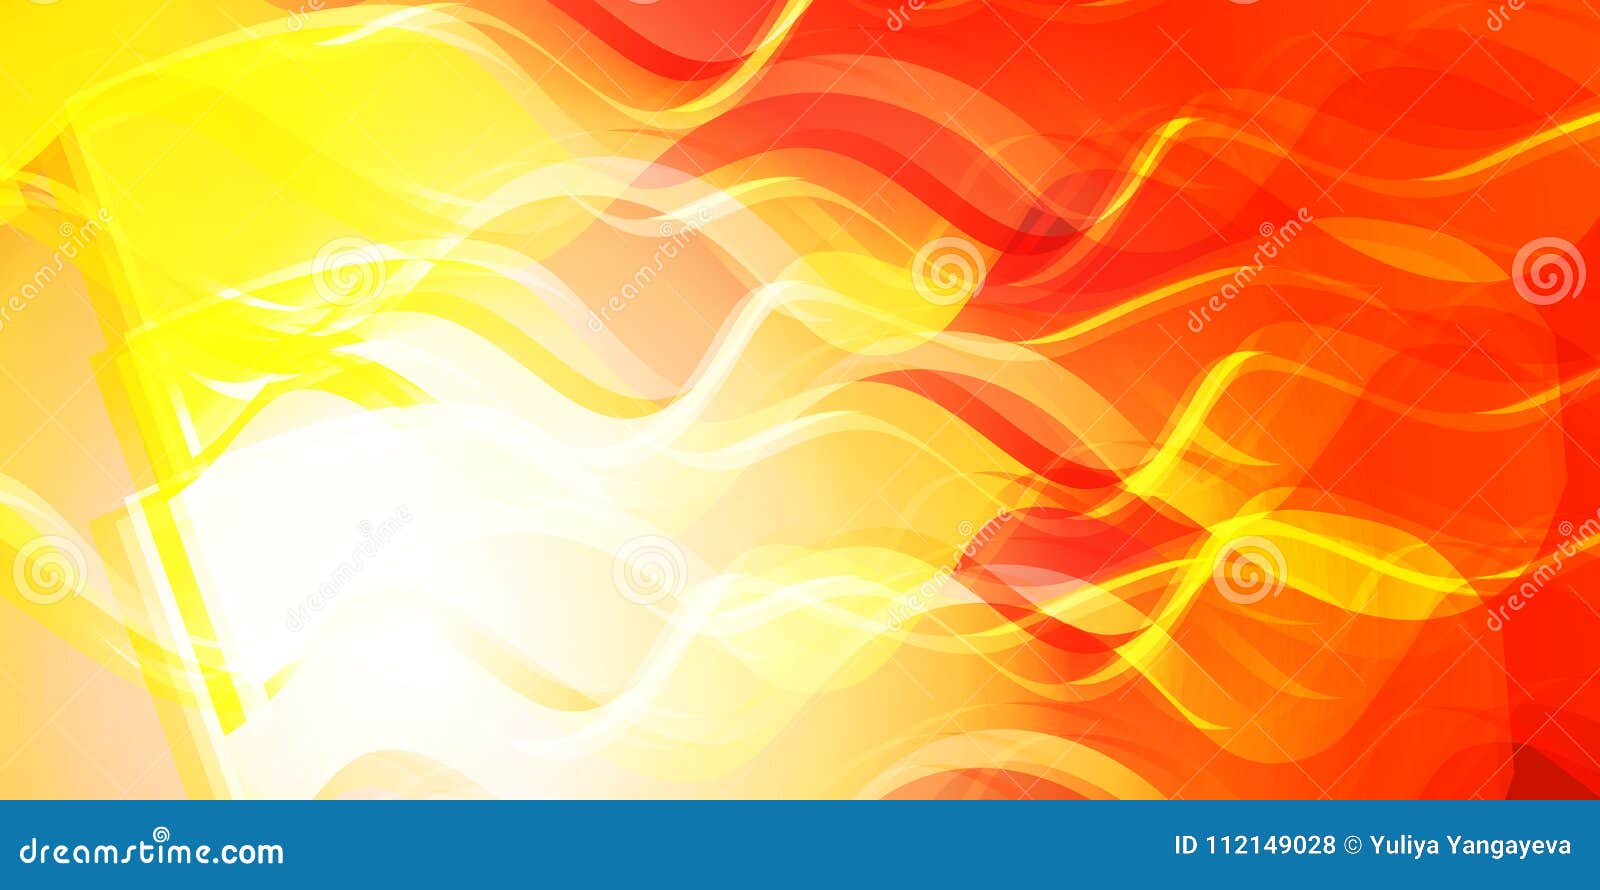 Theme of Fire for the Banner. Stock Vector - Illustration of ignite, fiery:  112149028